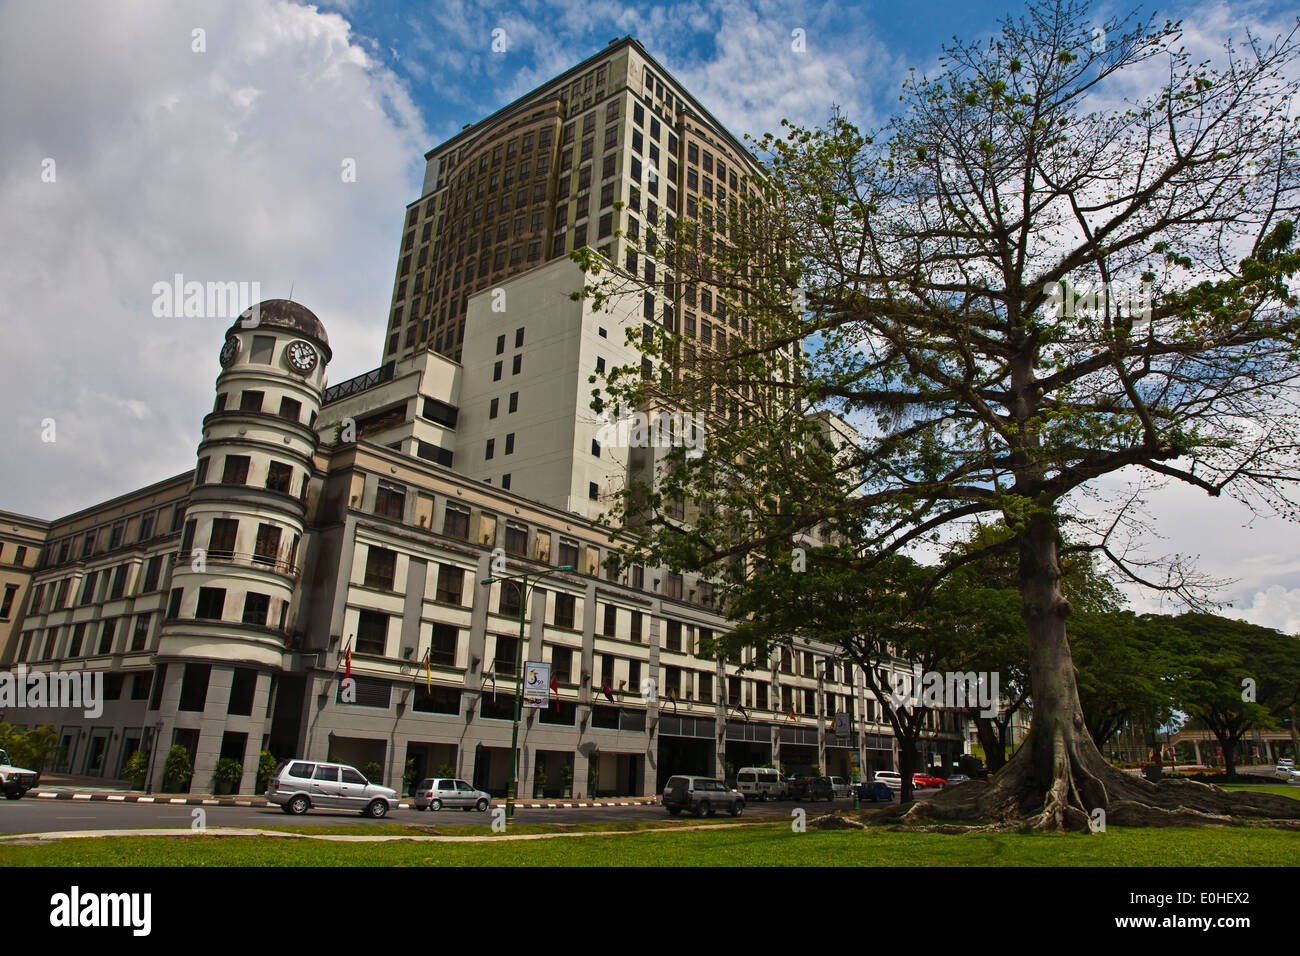 A classical building in the city of KUCHING - SARAWAK, BORNEO, MALAYSIA Stock Photo